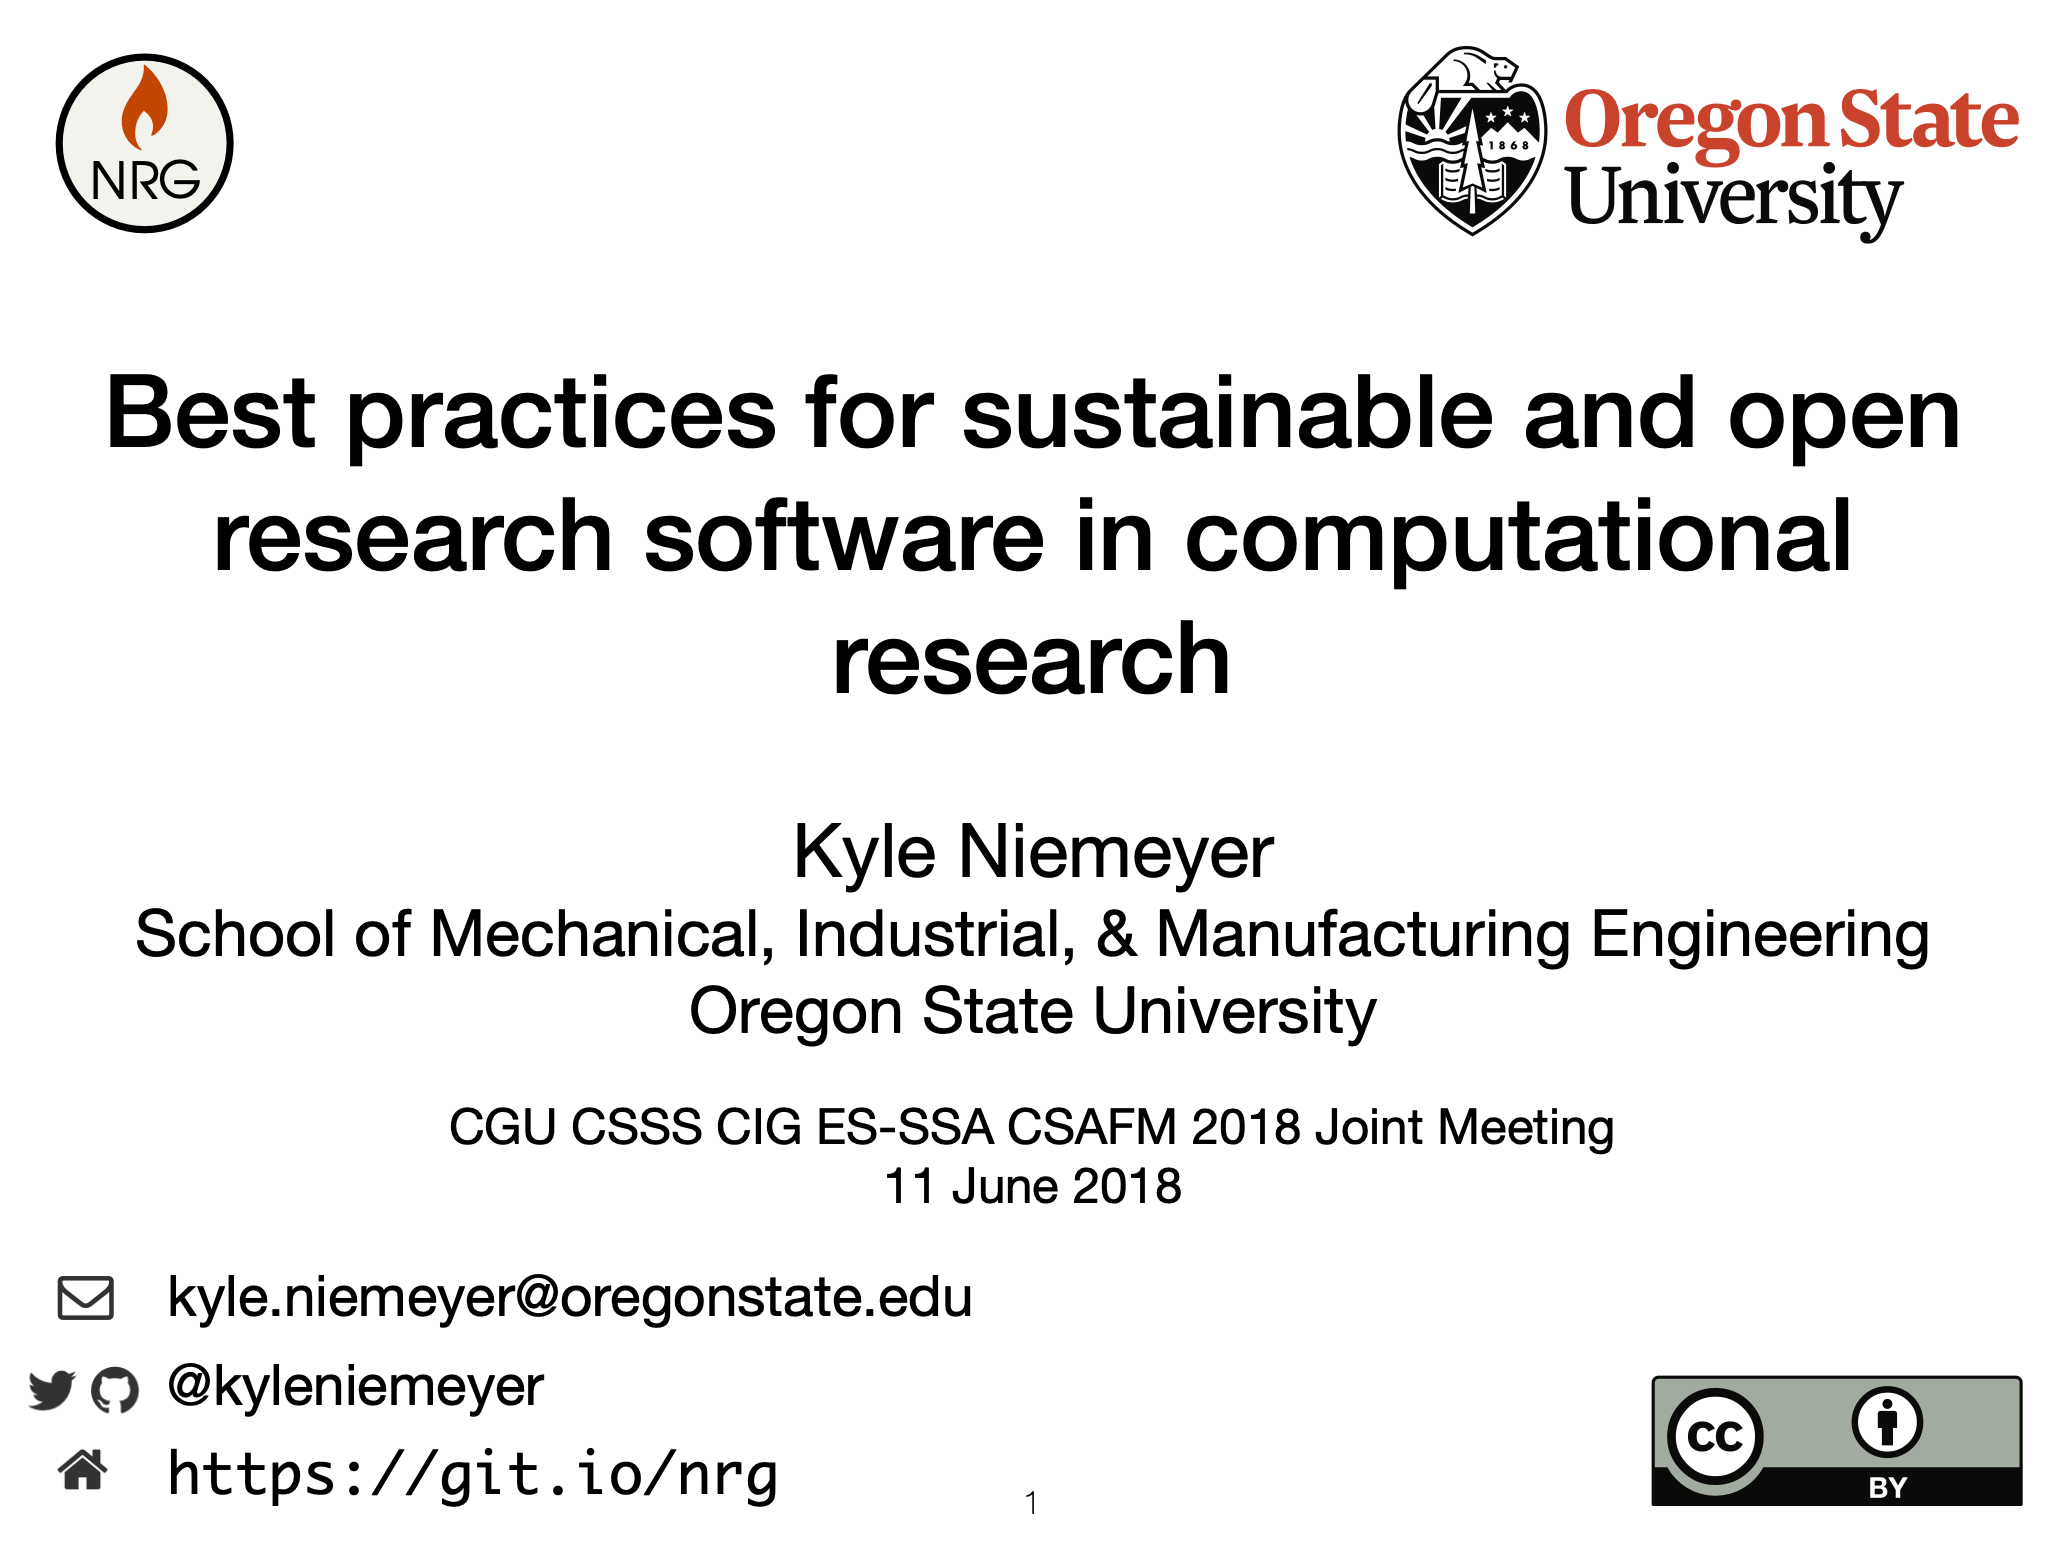 Title slide, that says 'Best practices for sustainable and open research software in computational research'.